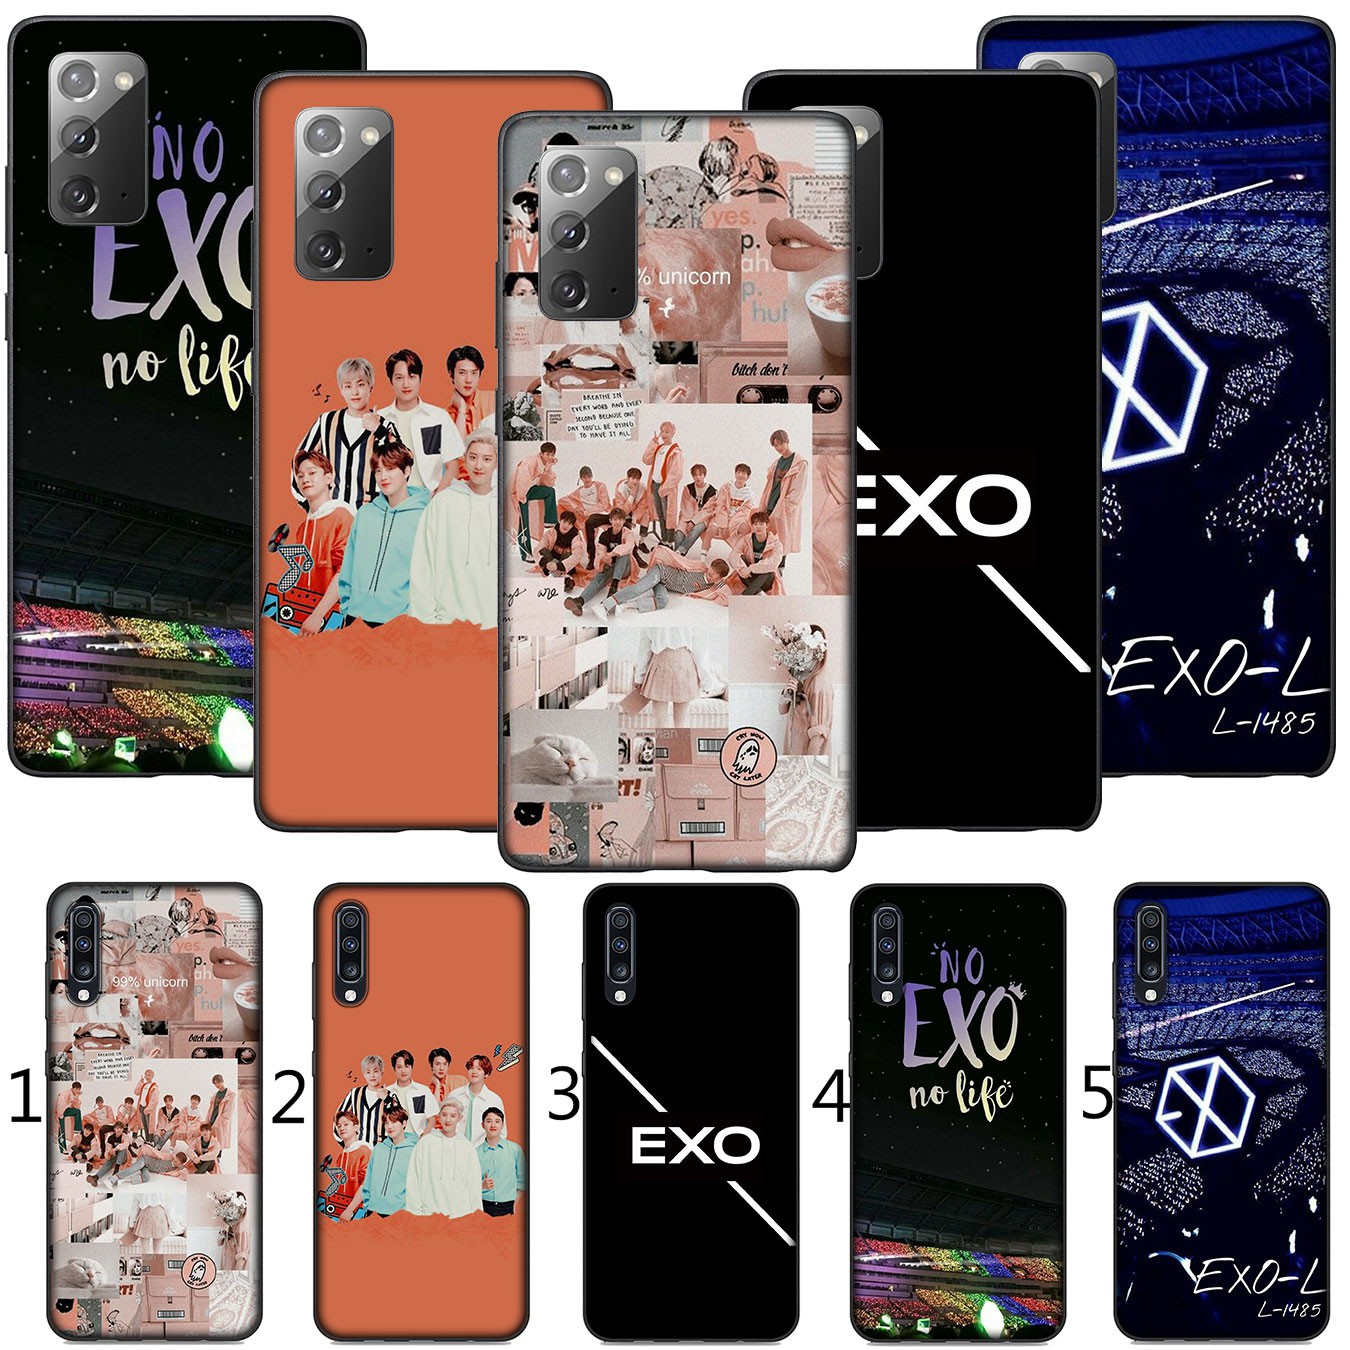 Samsung Galaxy S21 Ultra S8 Plus F62 M62 A2 A32 A52 A72 S21+ S8+ S21Plus Casing Soft Silicone Phone Case kpop exo Cover